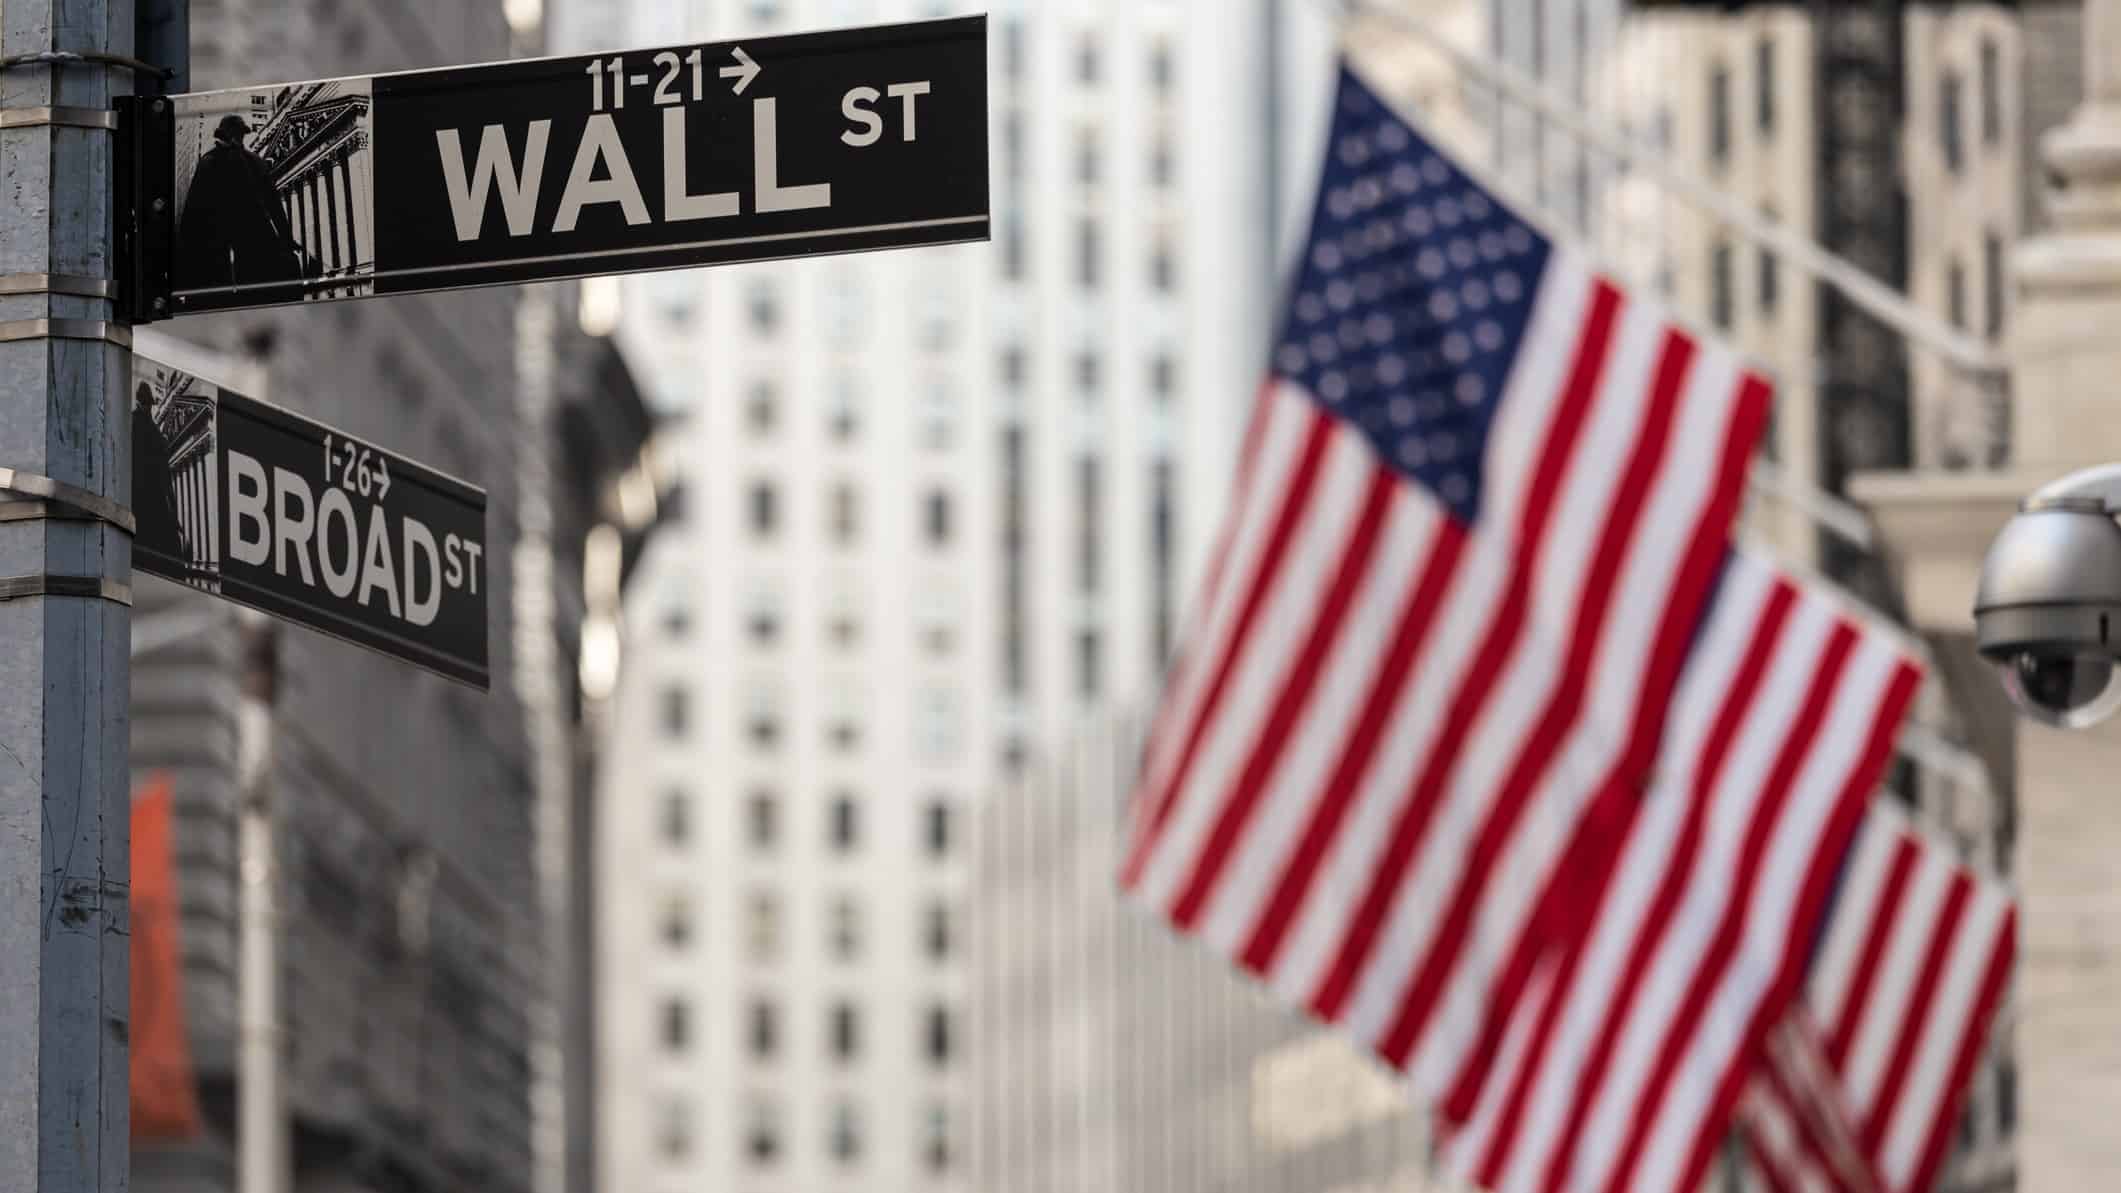 Road sign for 'Wall St' with US flags in background